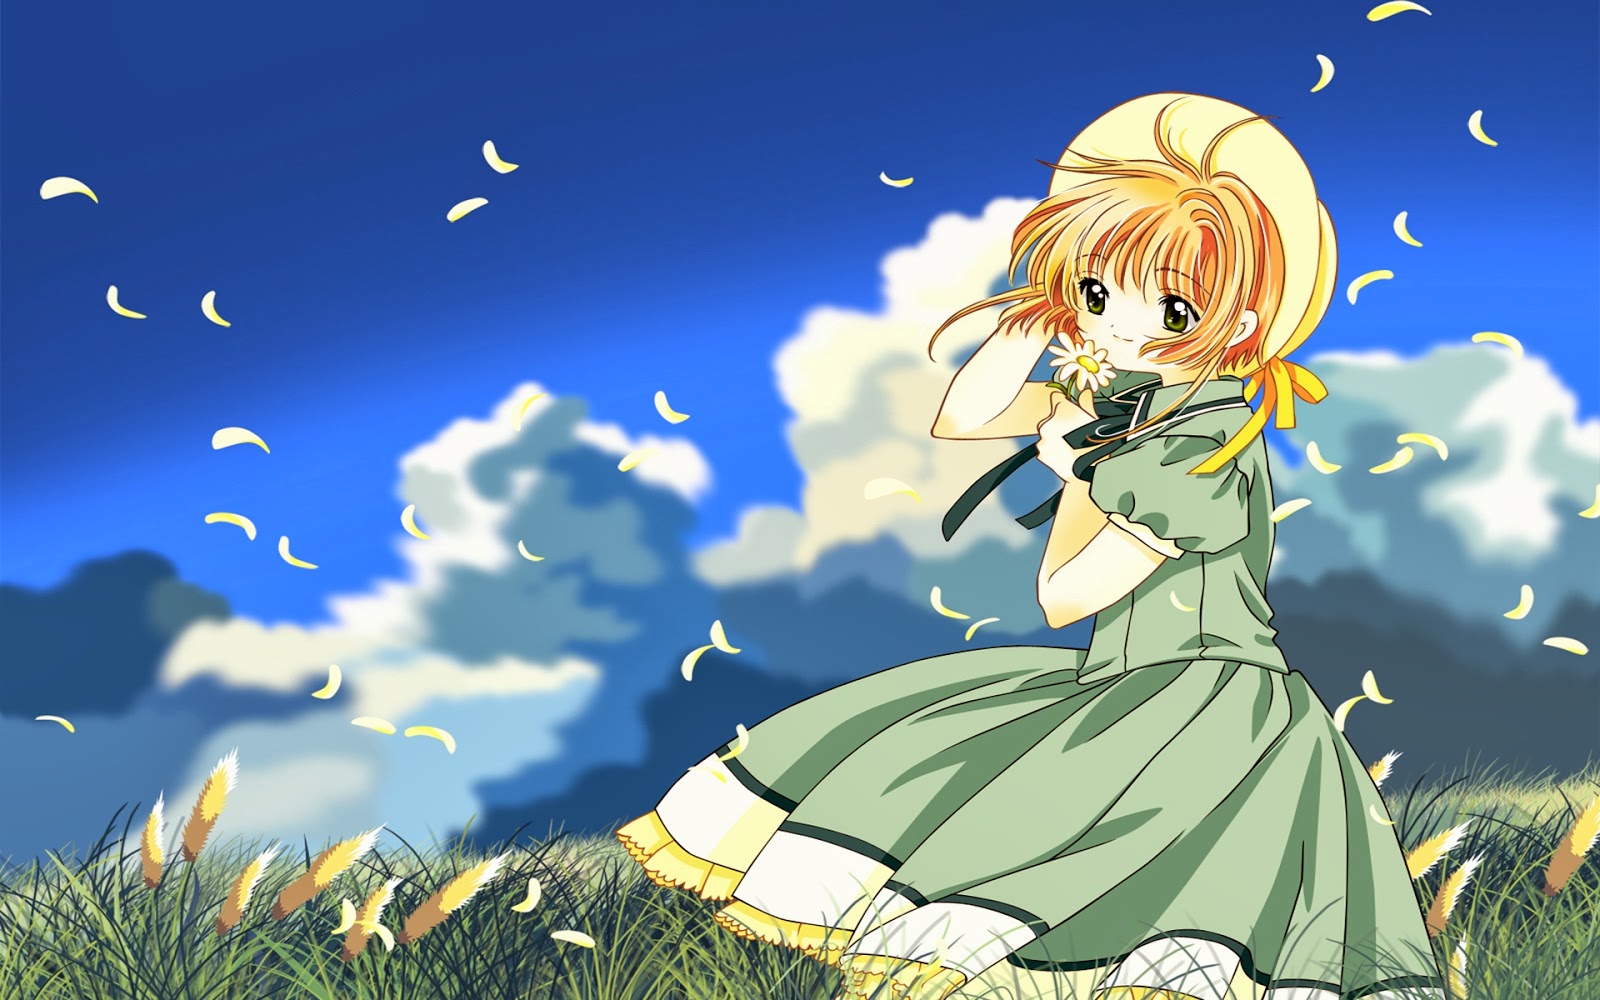 Cute girl anime wallpaper collection ~ Charming collection ...